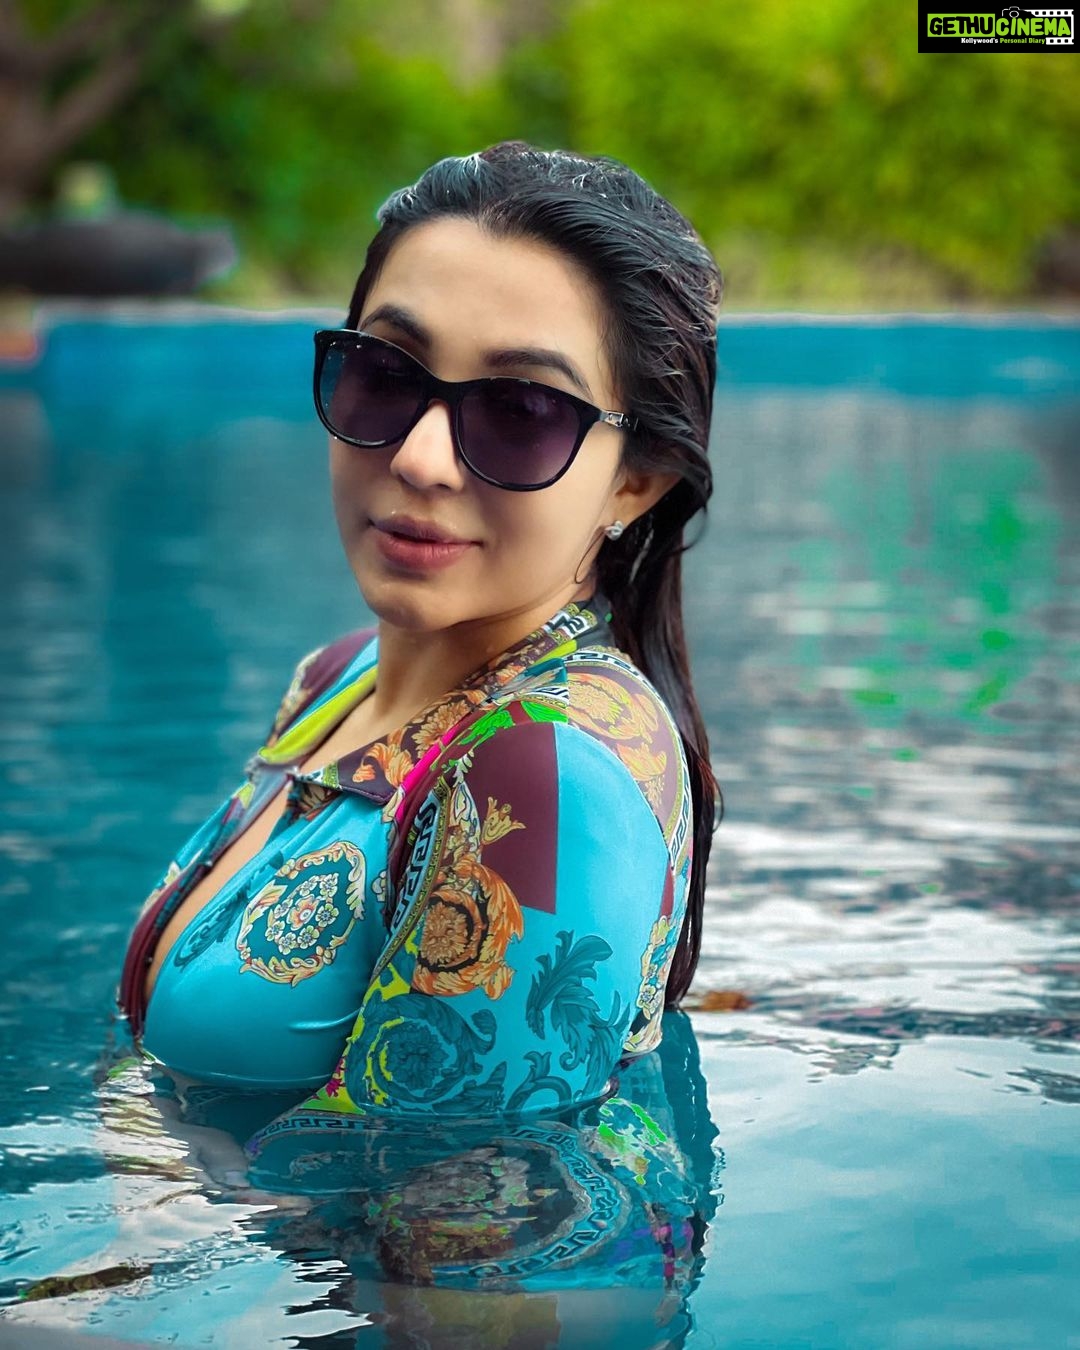 Parvatii Nair - 115.9K Likes - Most Liked Instagram Photos